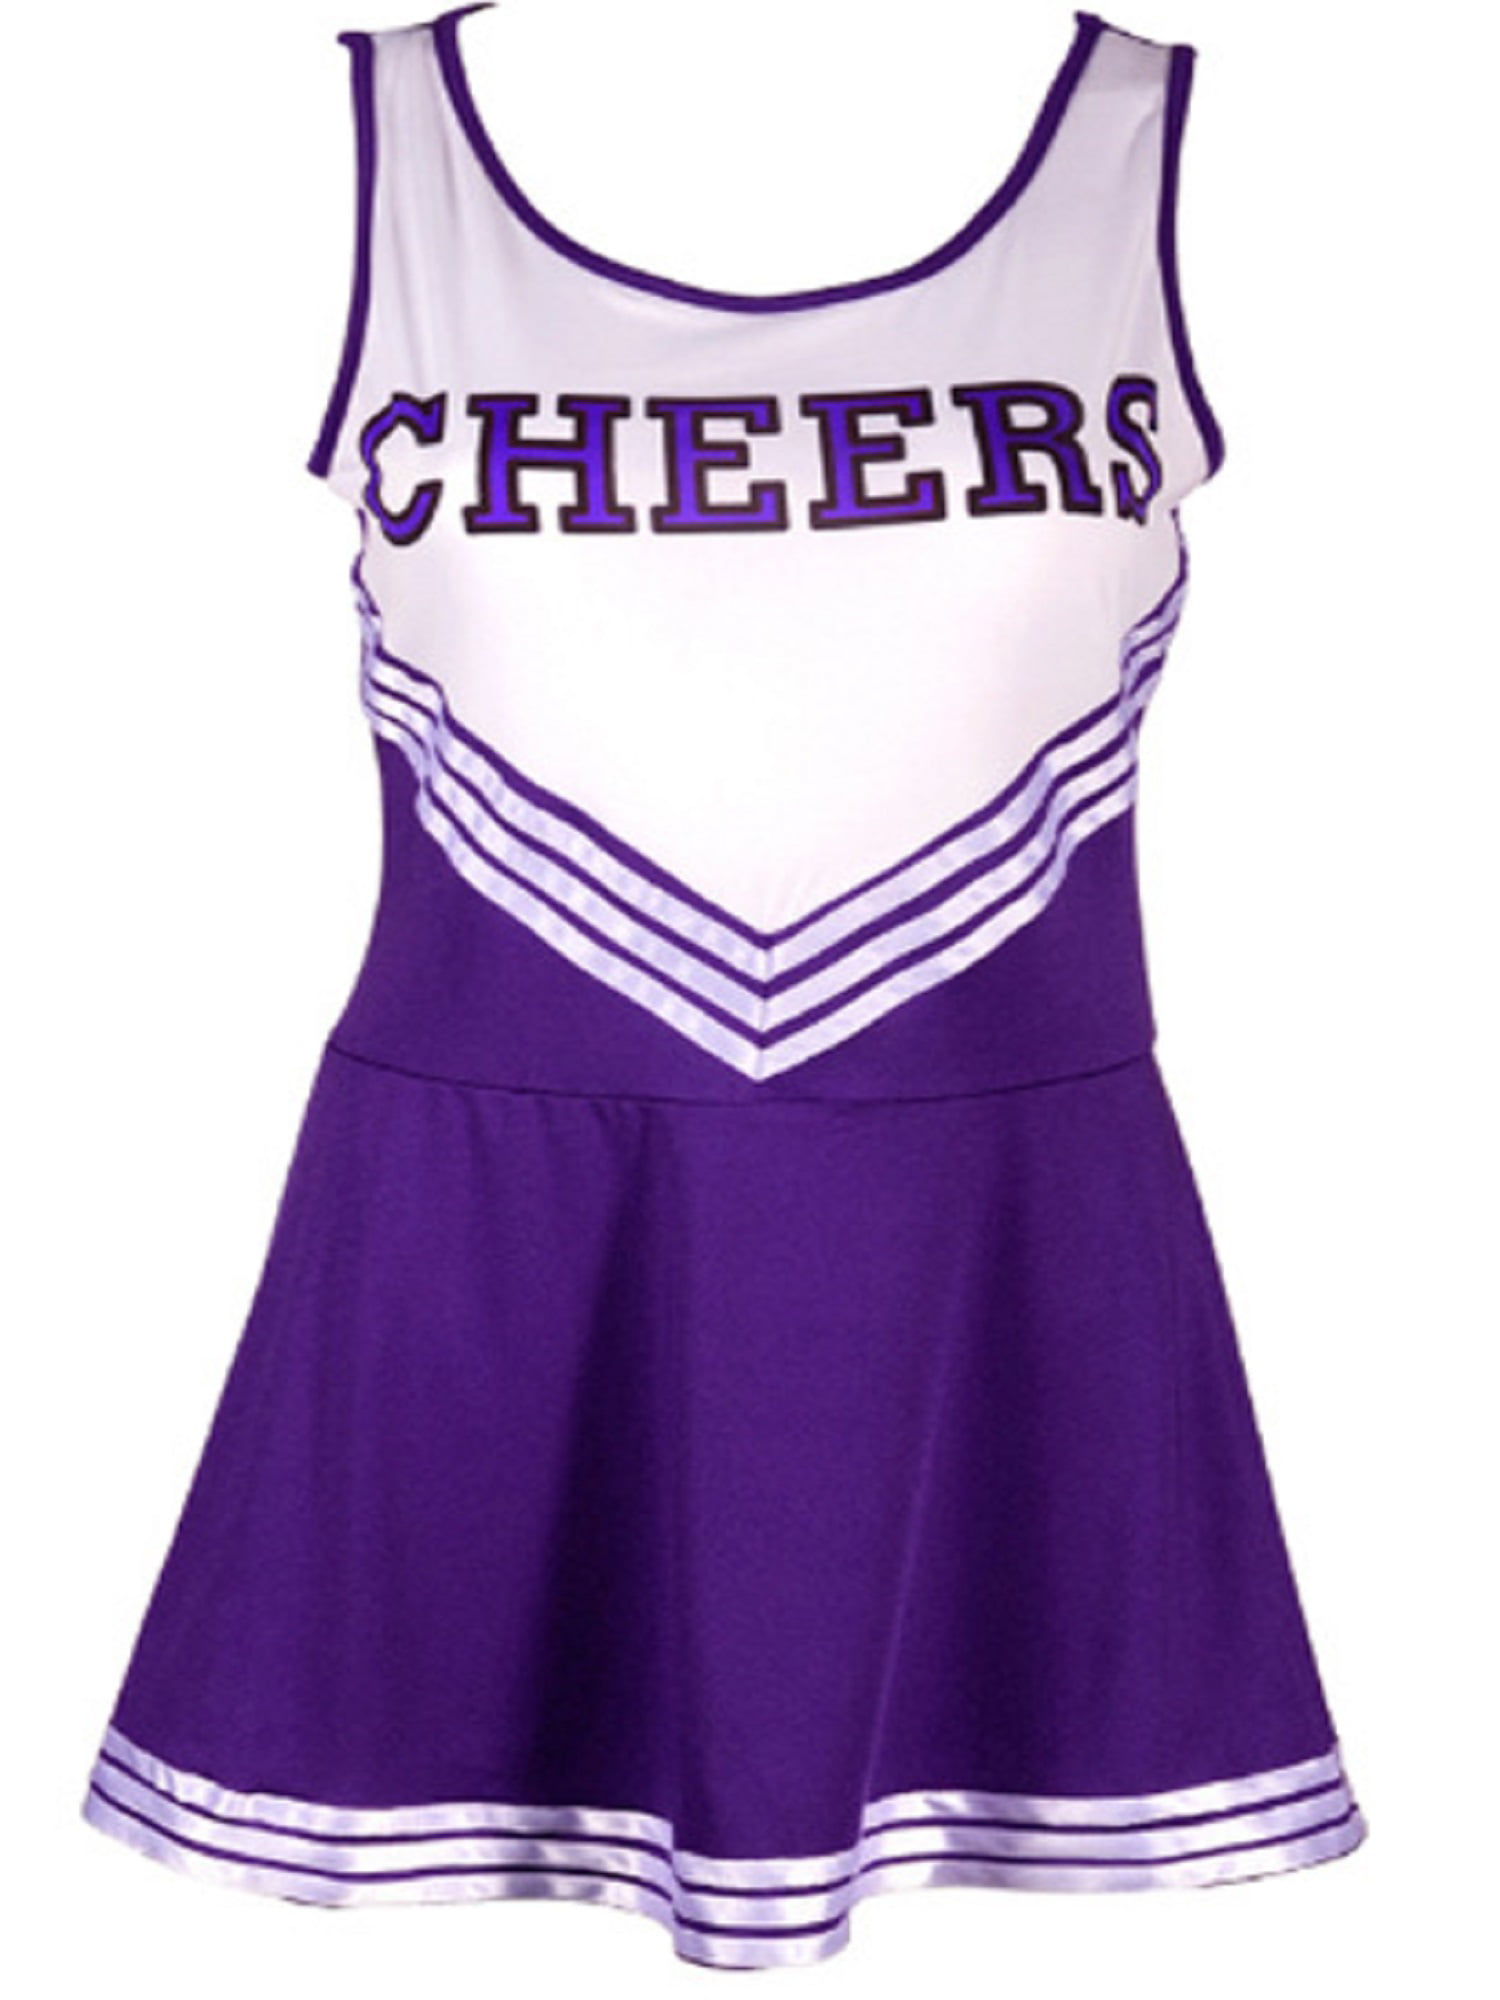 Details about   Cheerleader Costume Kids Fancy Dress Outfit